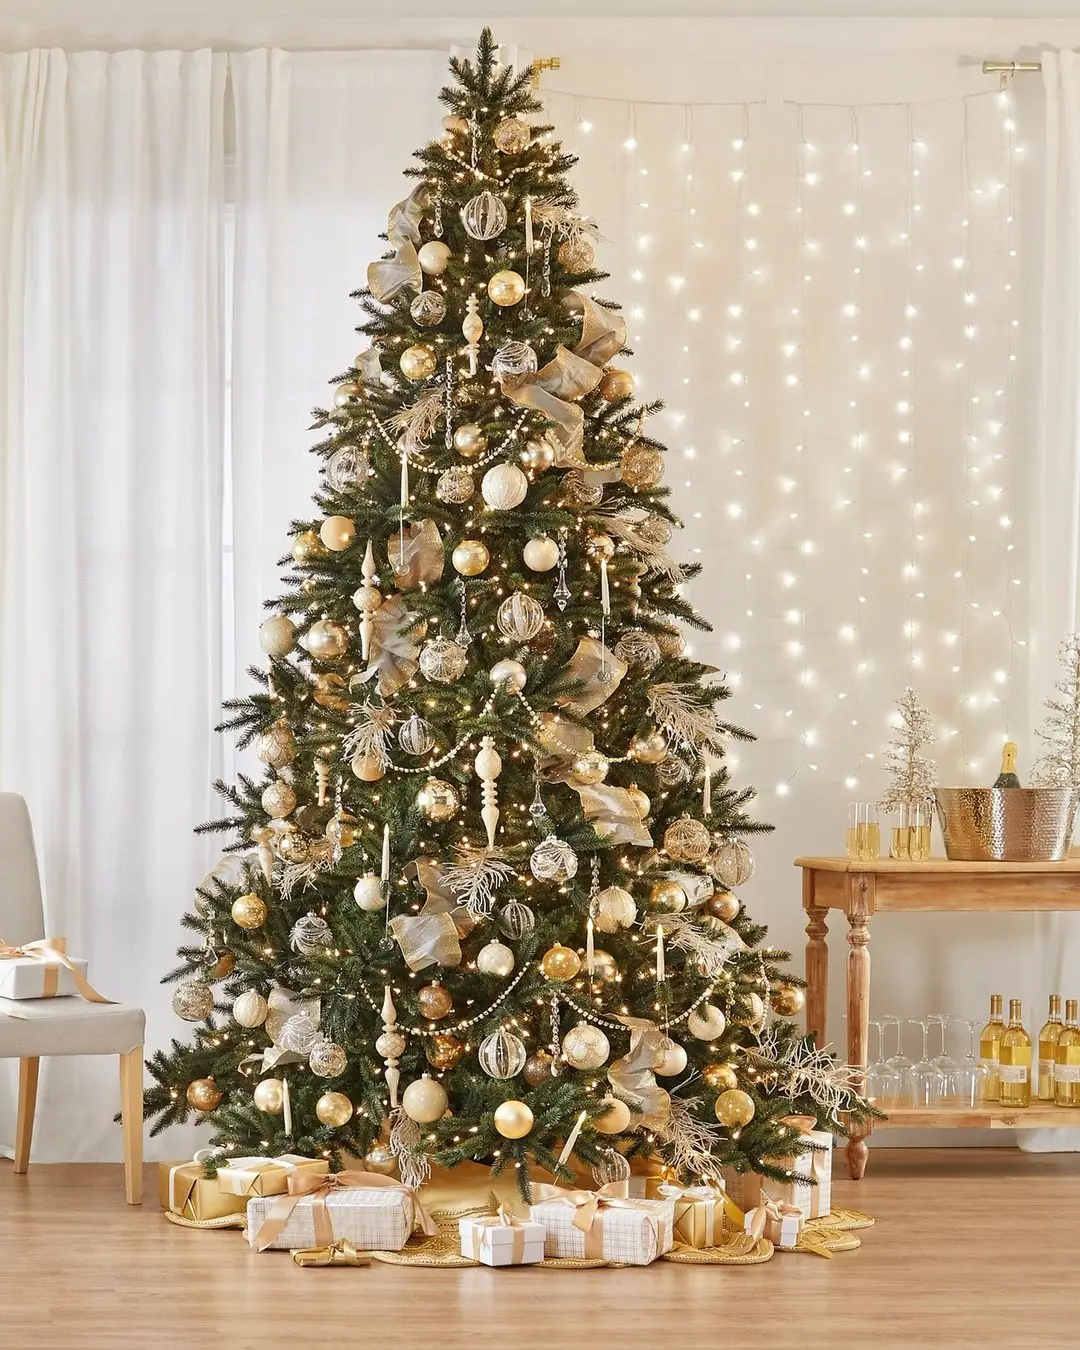 Check out These Cute Christmas Trees to Inspire Your Own ...